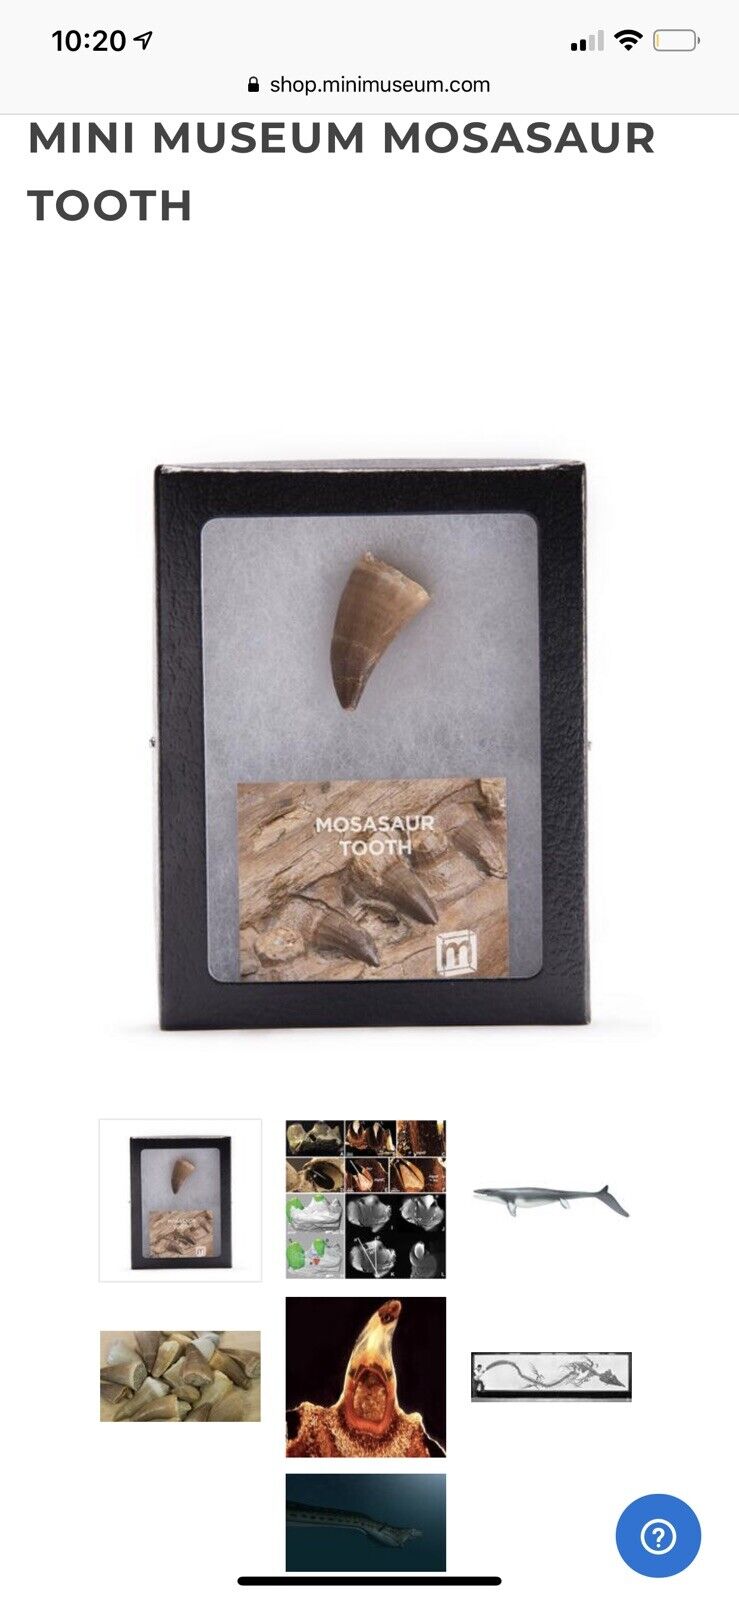 SOLD-OUT HANS FEX MINI MUSEUM MOSASAUR TOOTH SPECIMEN